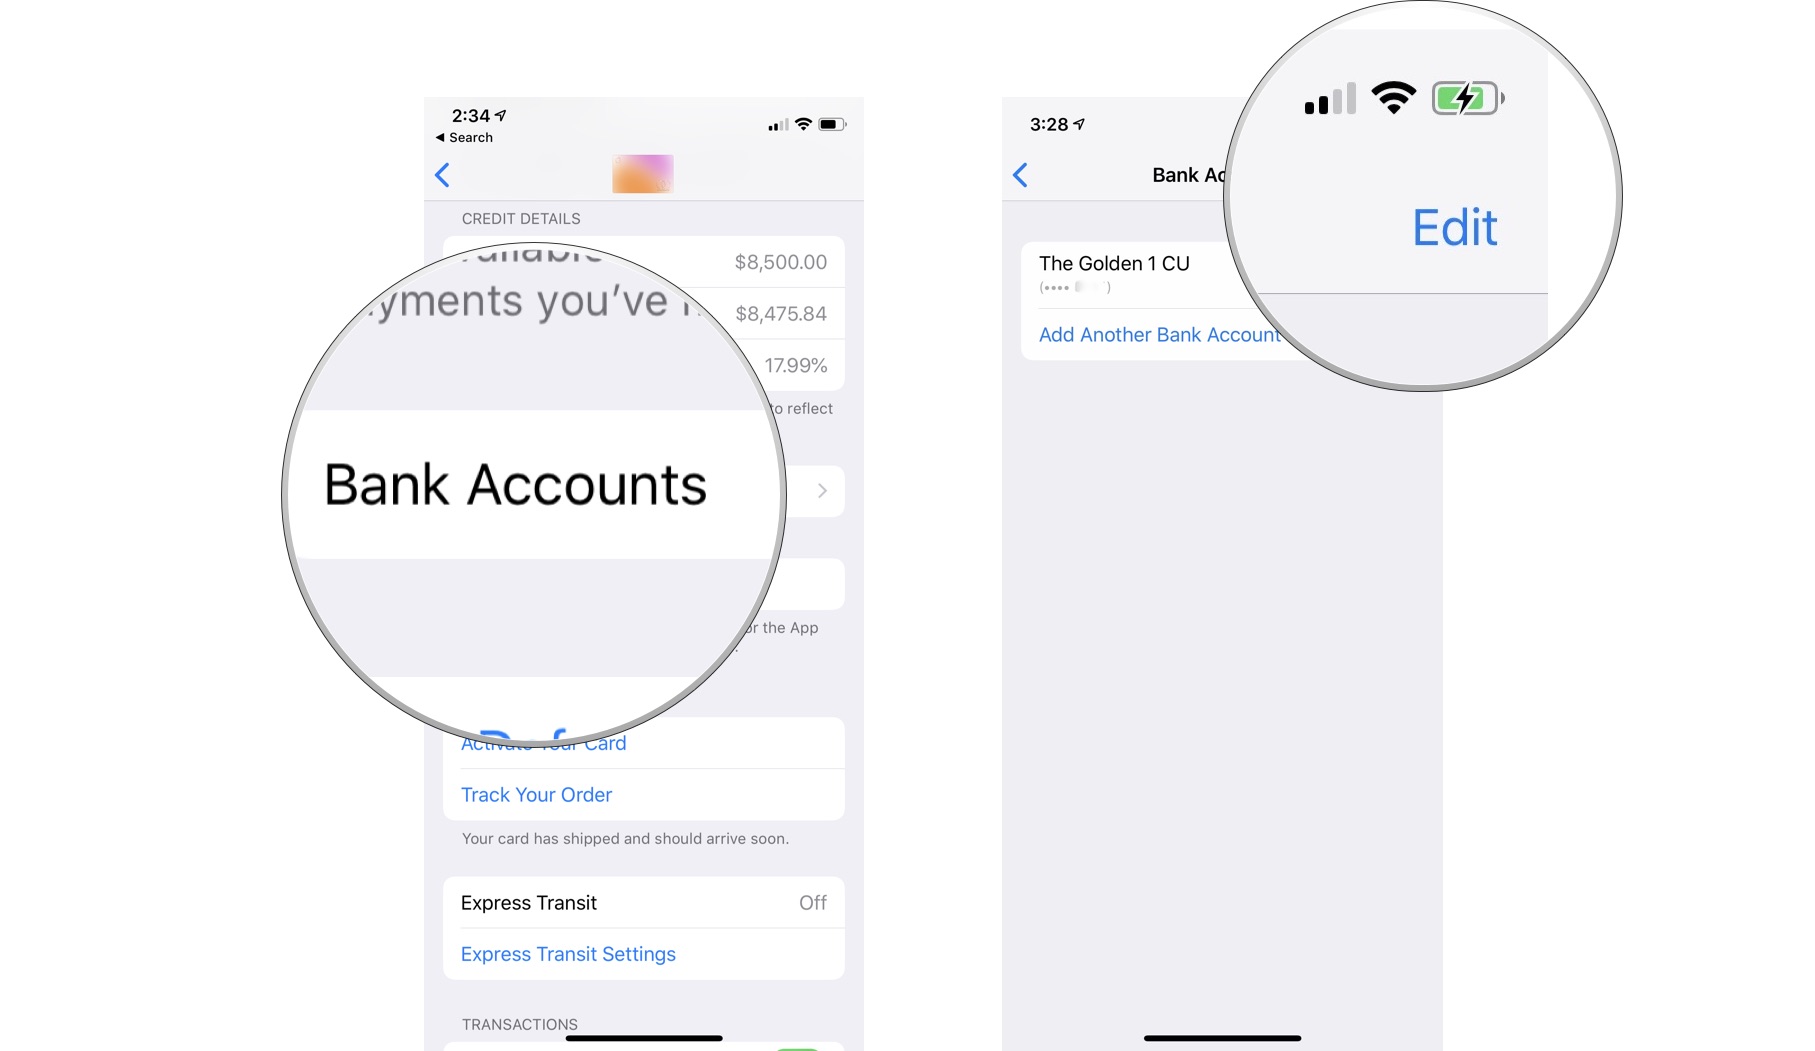 Tap Bank Accounts, then tap Edit in the upper right corner